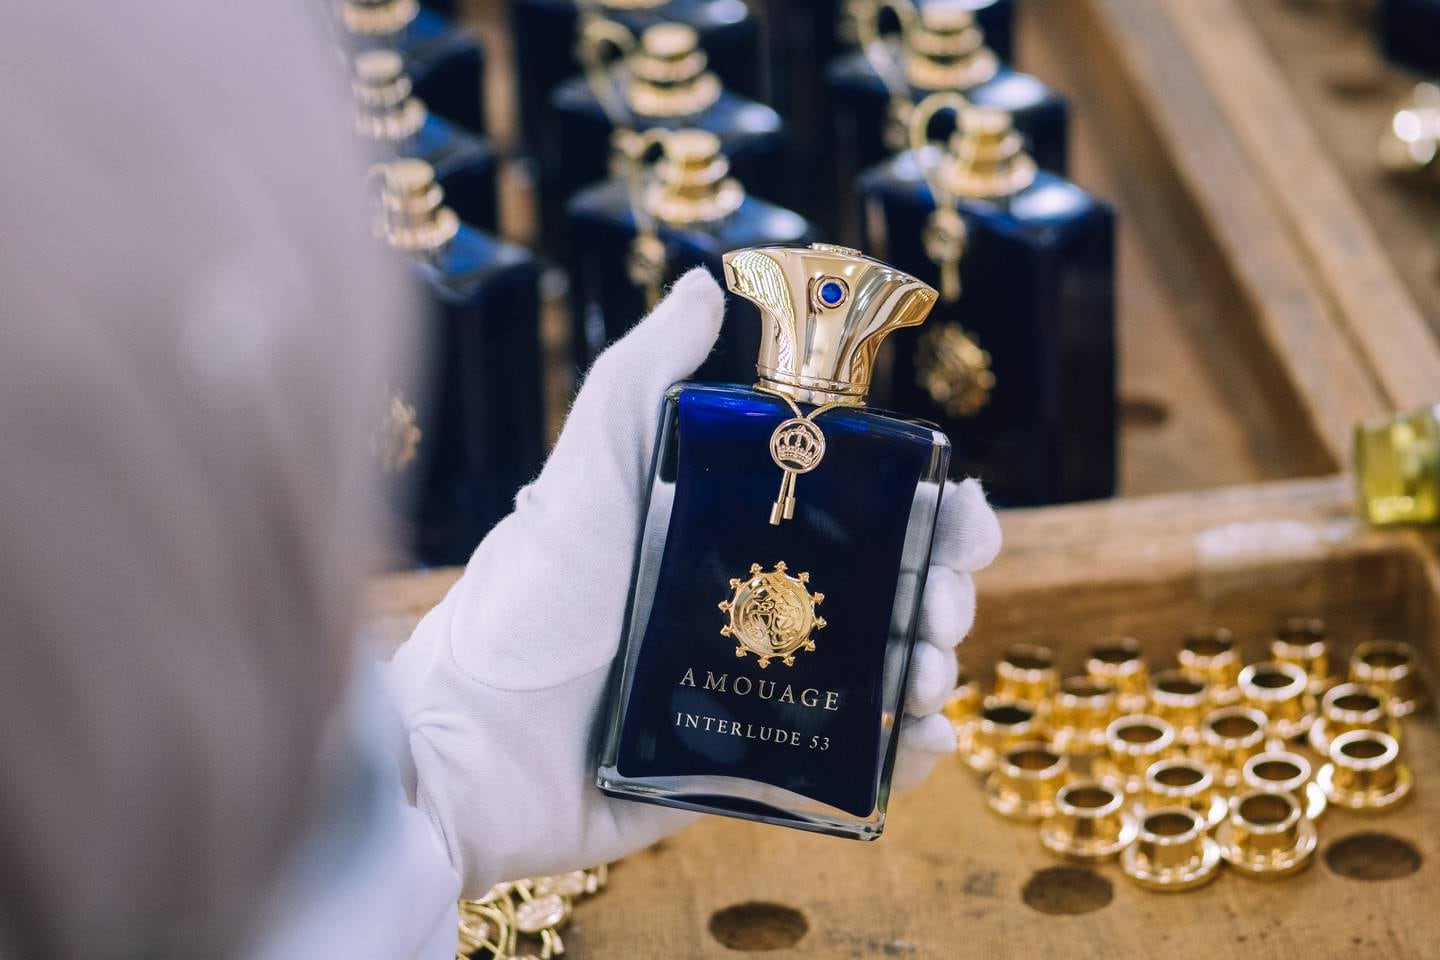 Inside the factory of Amouage, an Omani perfume house founded in 1983 that is currently seeing significant growth for its high-end range. Amouage.